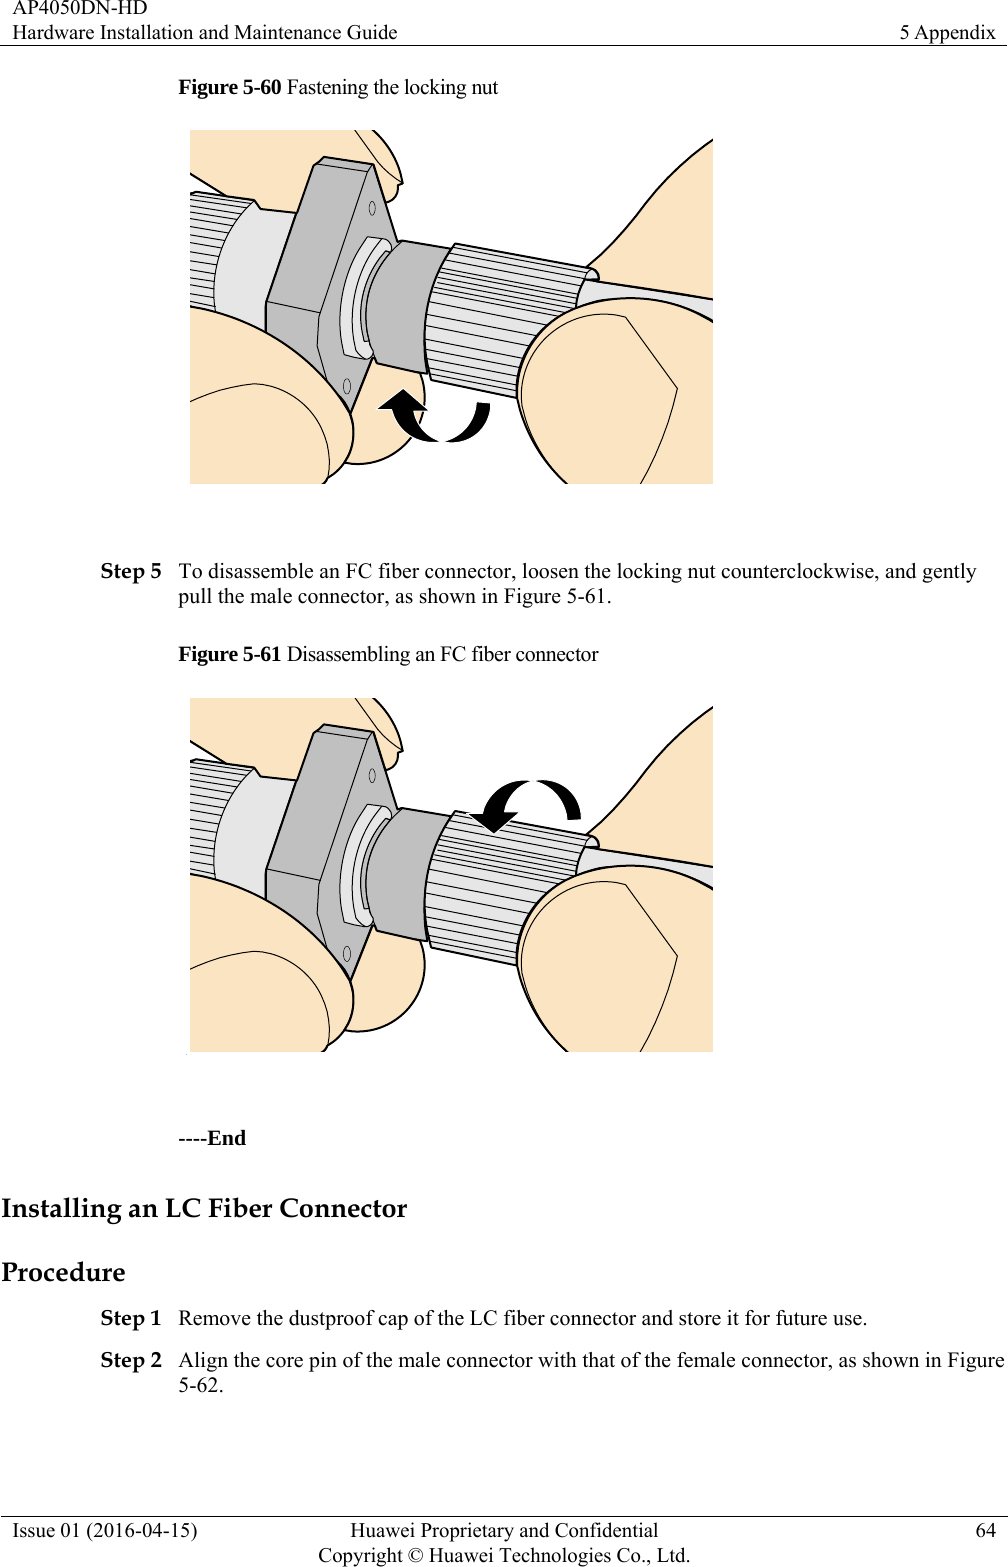 AP4050DN-HD Hardware Installation and Maintenance Guide  5 Appendix Issue 01 (2016-04-15)  Huawei Proprietary and Confidential         Copyright © Huawei Technologies Co., Ltd.64 Figure 5-60 Fastening the locking nut   Step 5 To disassemble an FC fiber connector, loosen the locking nut counterclockwise, and gently pull the male connector, as shown in Figure 5-61. Figure 5-61 Disassembling an FC fiber connector   ----End Installing an LC Fiber Connector Procedure Step 1 Remove the dustproof cap of the LC fiber connector and store it for future use. Step 2 Align the core pin of the male connector with that of the female connector, as shown in Figure 5-62. 